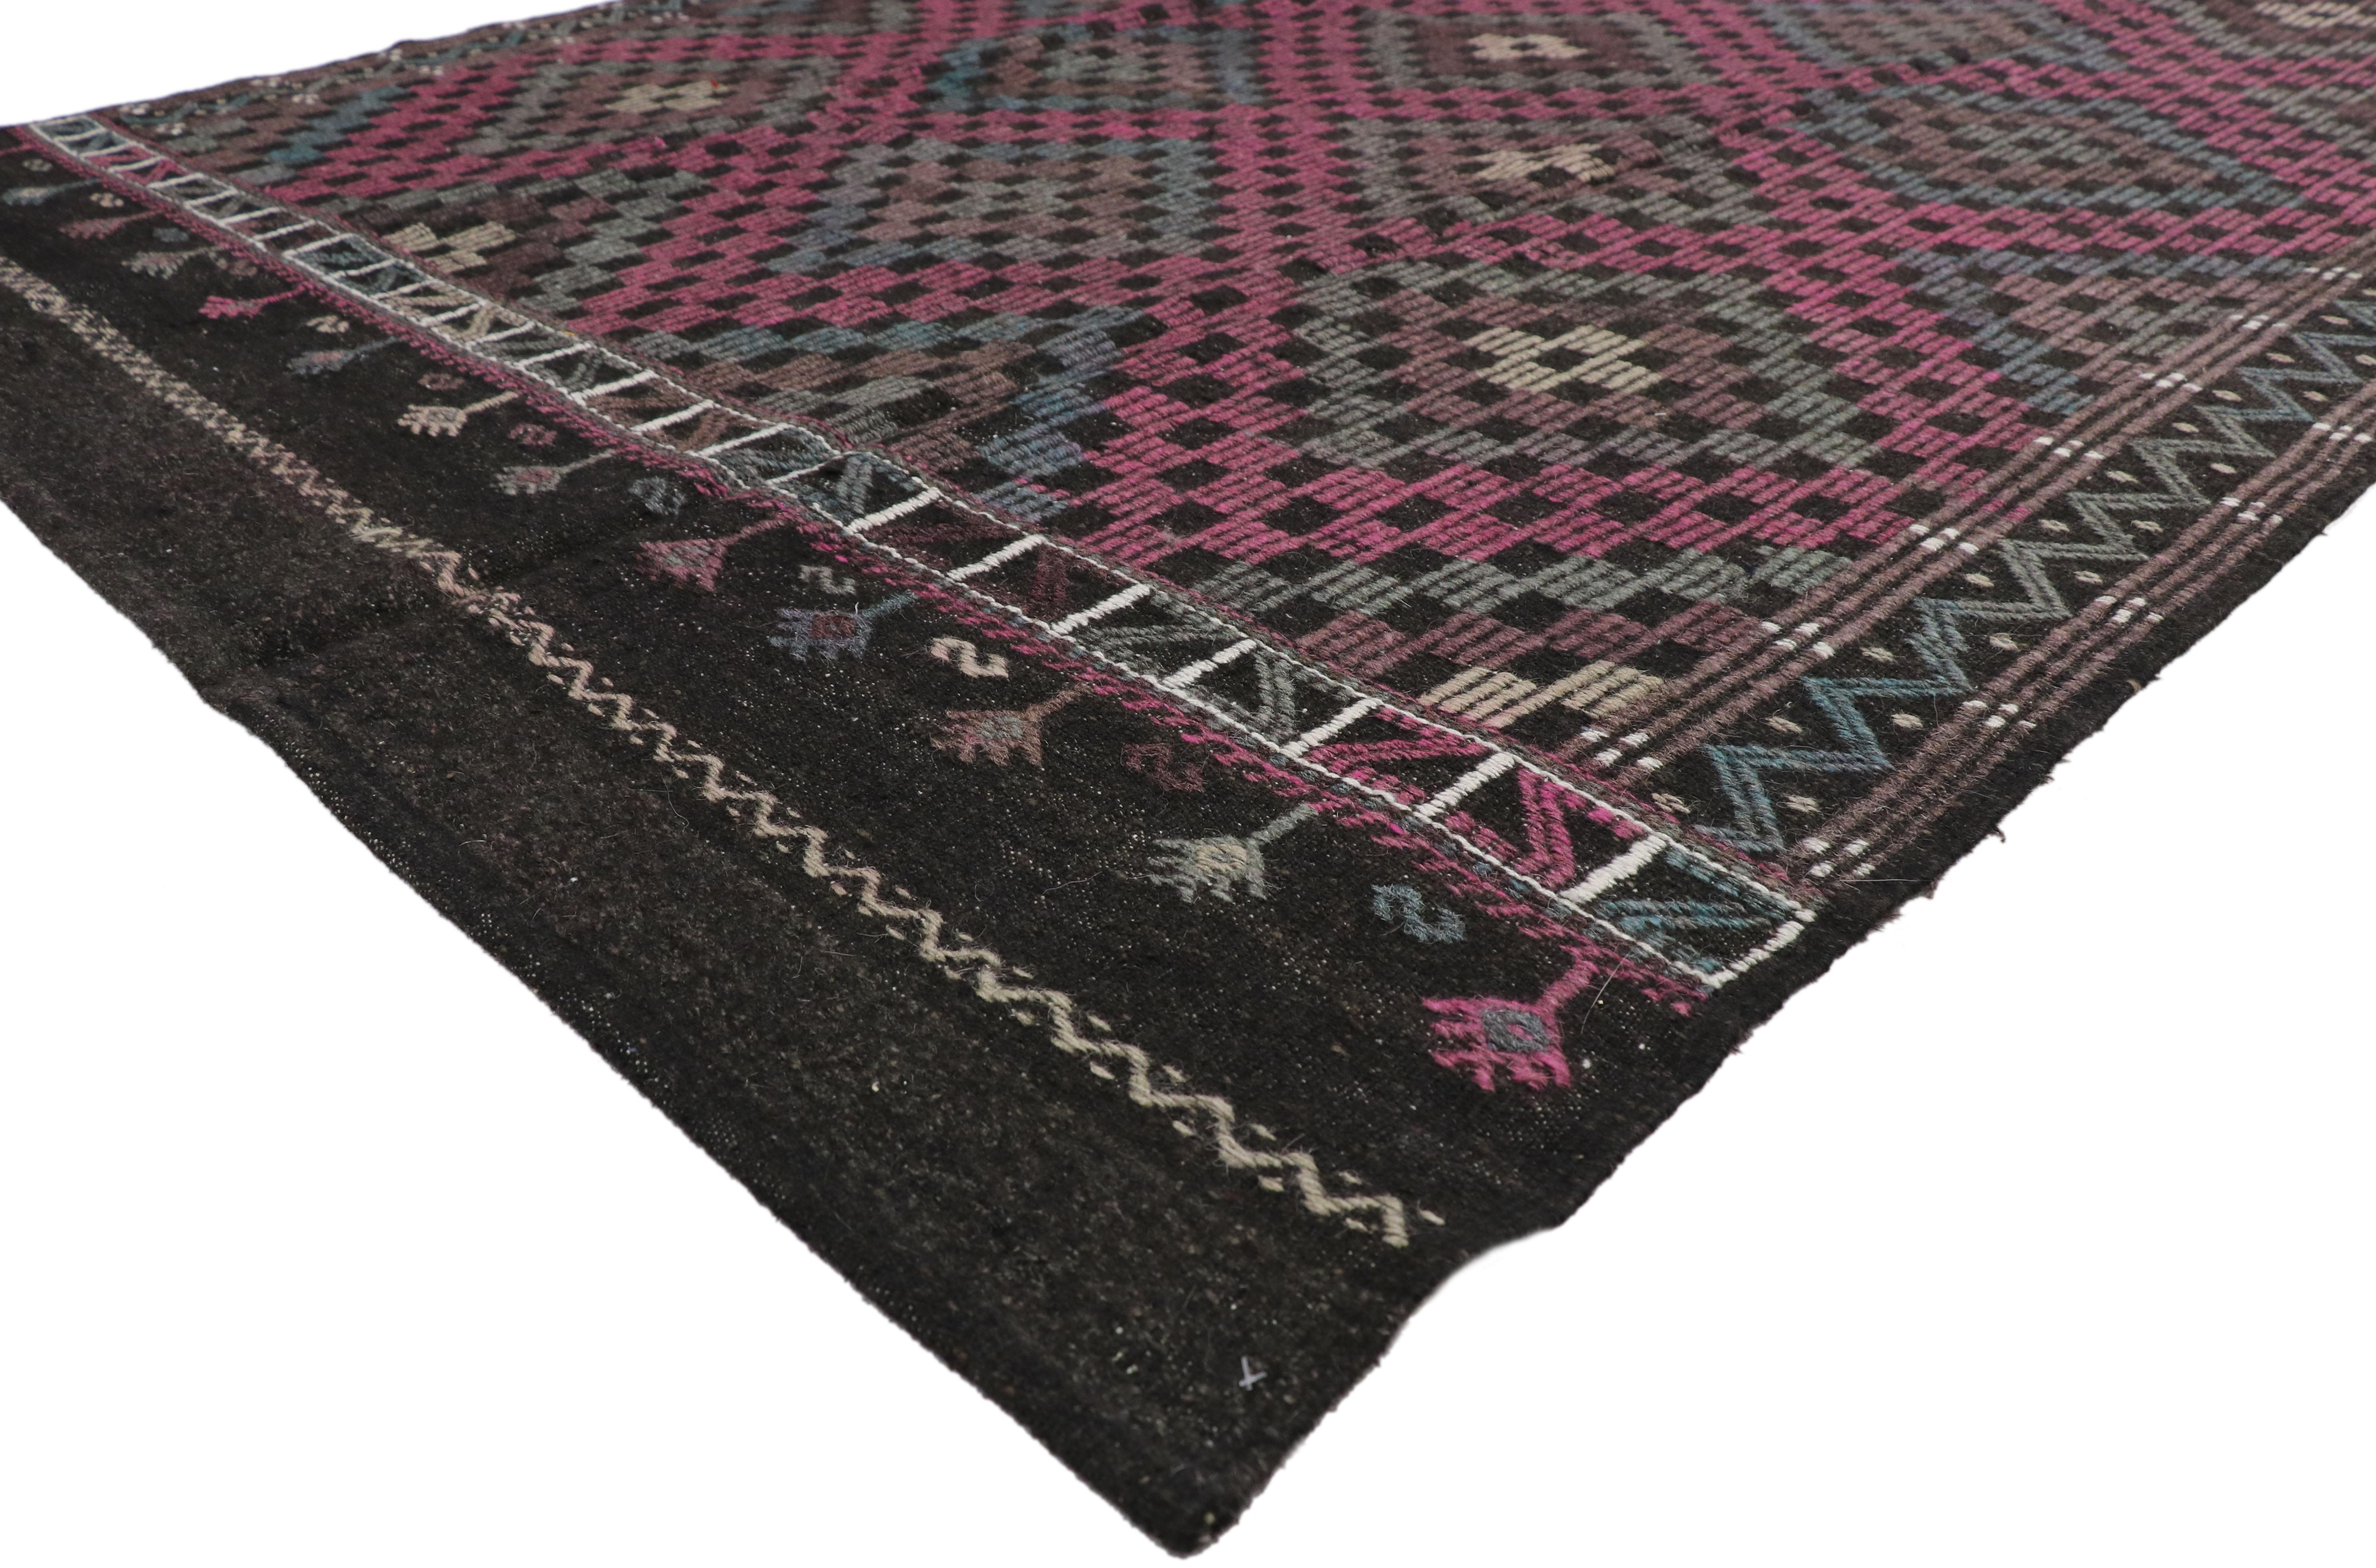 51095 Vintage Turkish Kilim Rug with Feminine Industrial Style, Flat-weave Kilim Rug 06'05 X 09'04. With a bold geometric pattern and striking appeal, this hand-woven wool vintage Turkish kilim rug can beautifully blend contemporary, modern, and